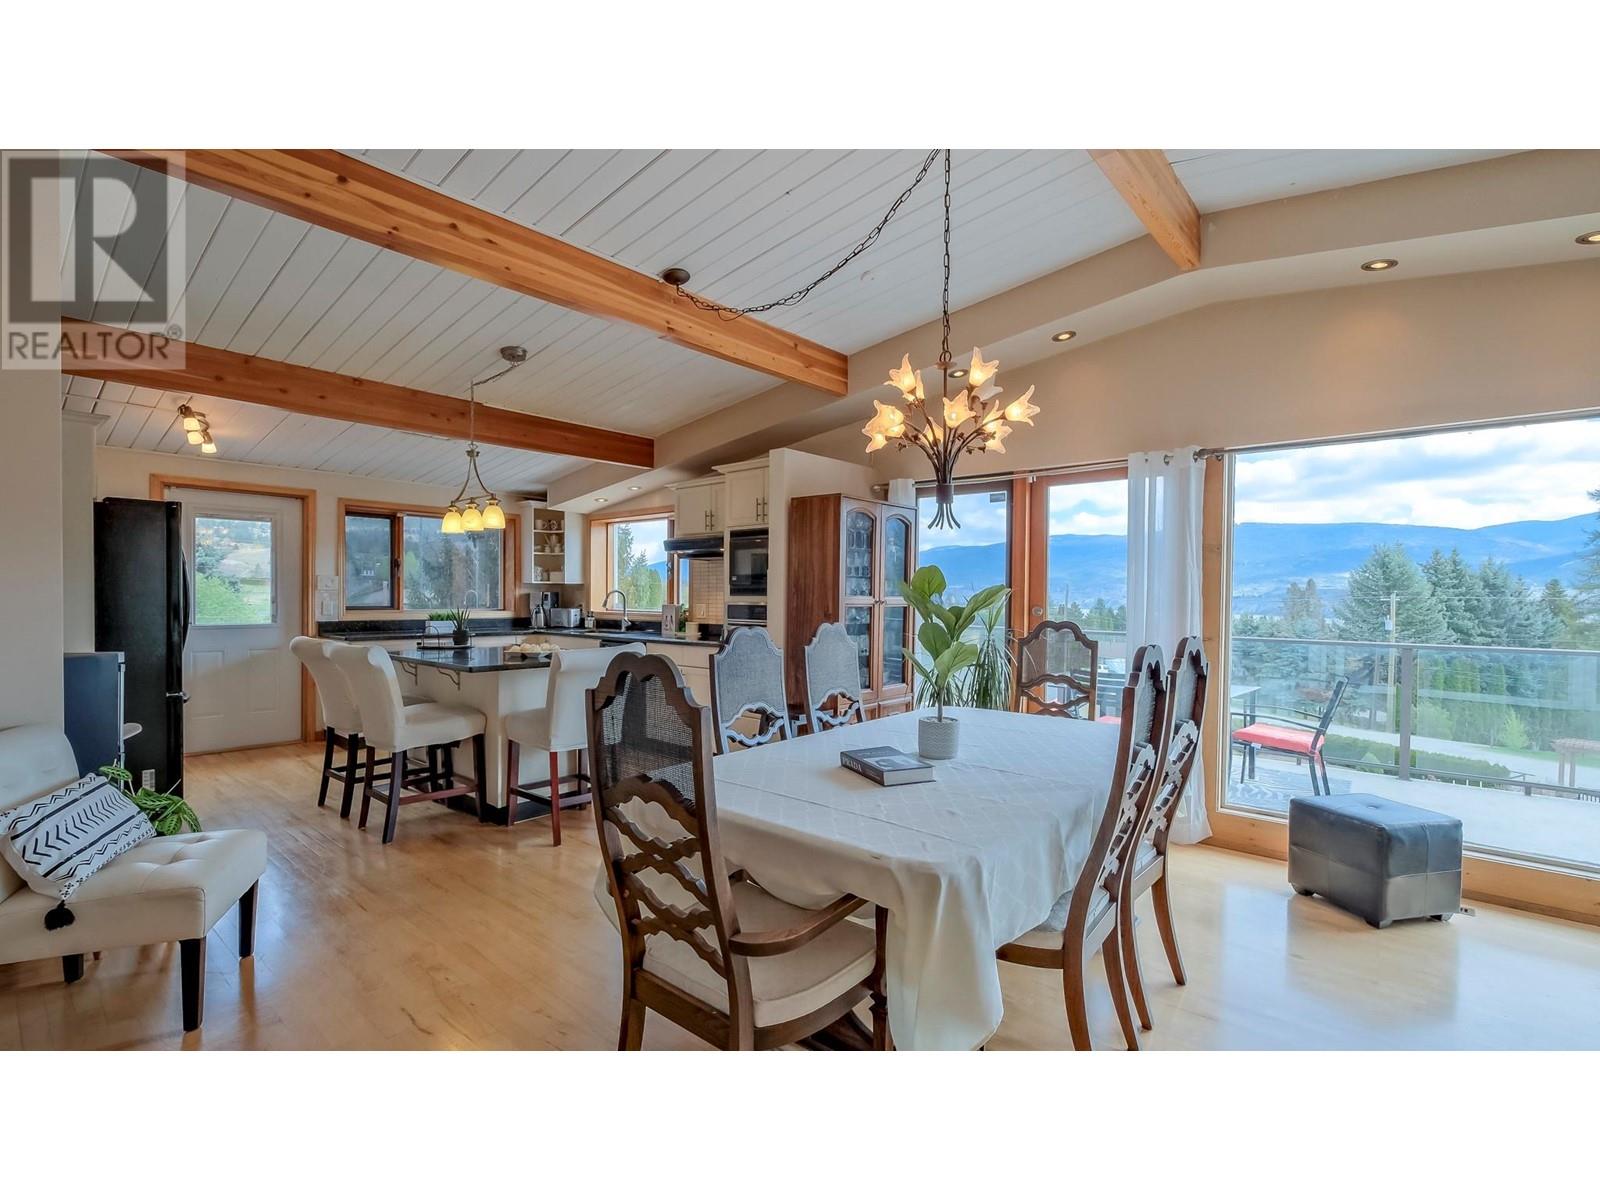 404 West Bench Drive, Penticton, British Columbia  V2A 8X9 - Photo 19 - 10311234